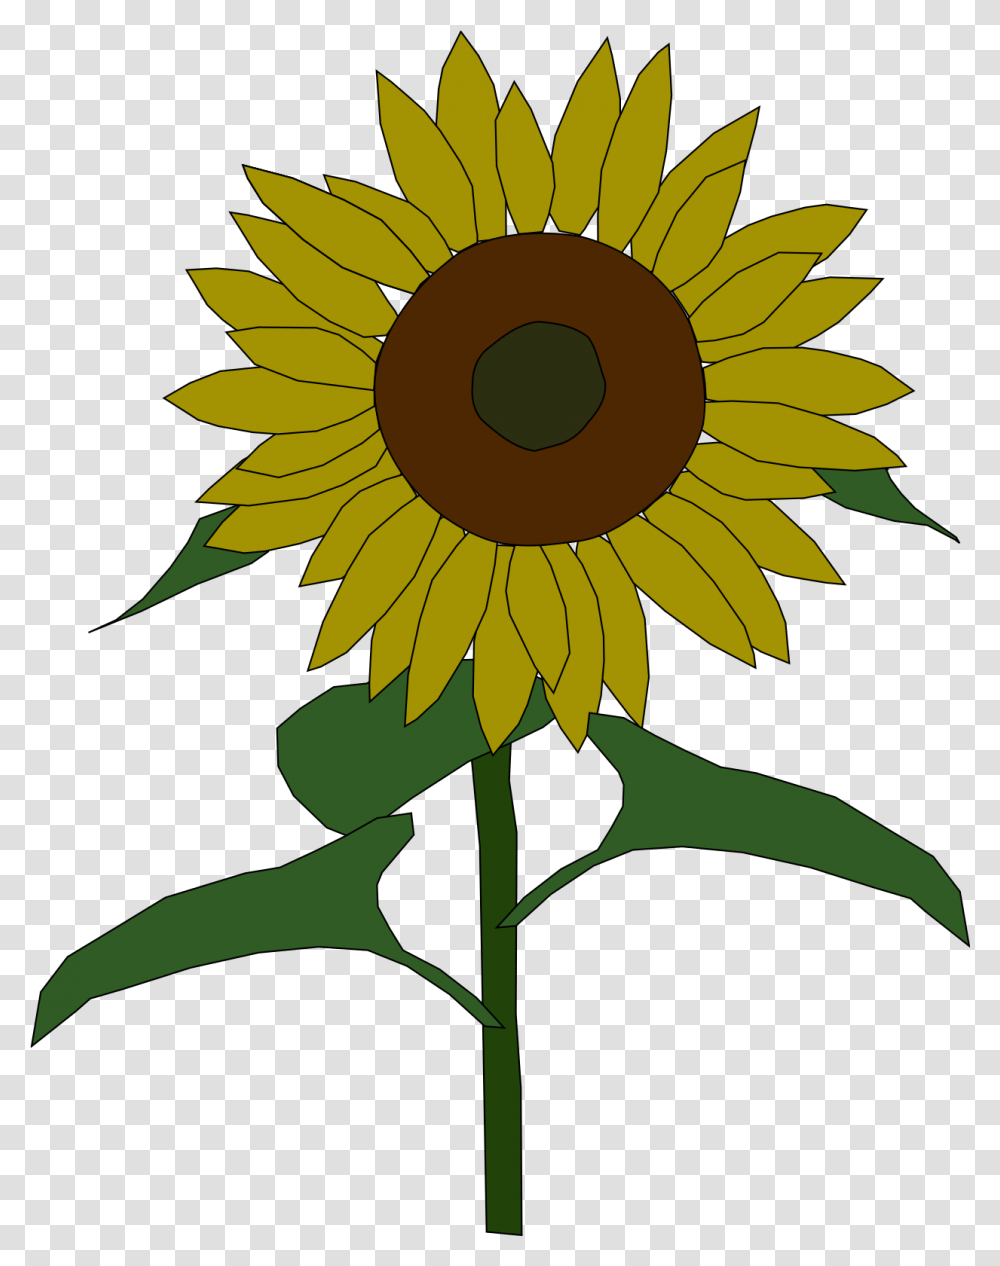 Sunflower Sun Clipart Clip Freeuse Stock Sunflower Clipart Images Of Sunflower, Plant, Blossom Transparent Png